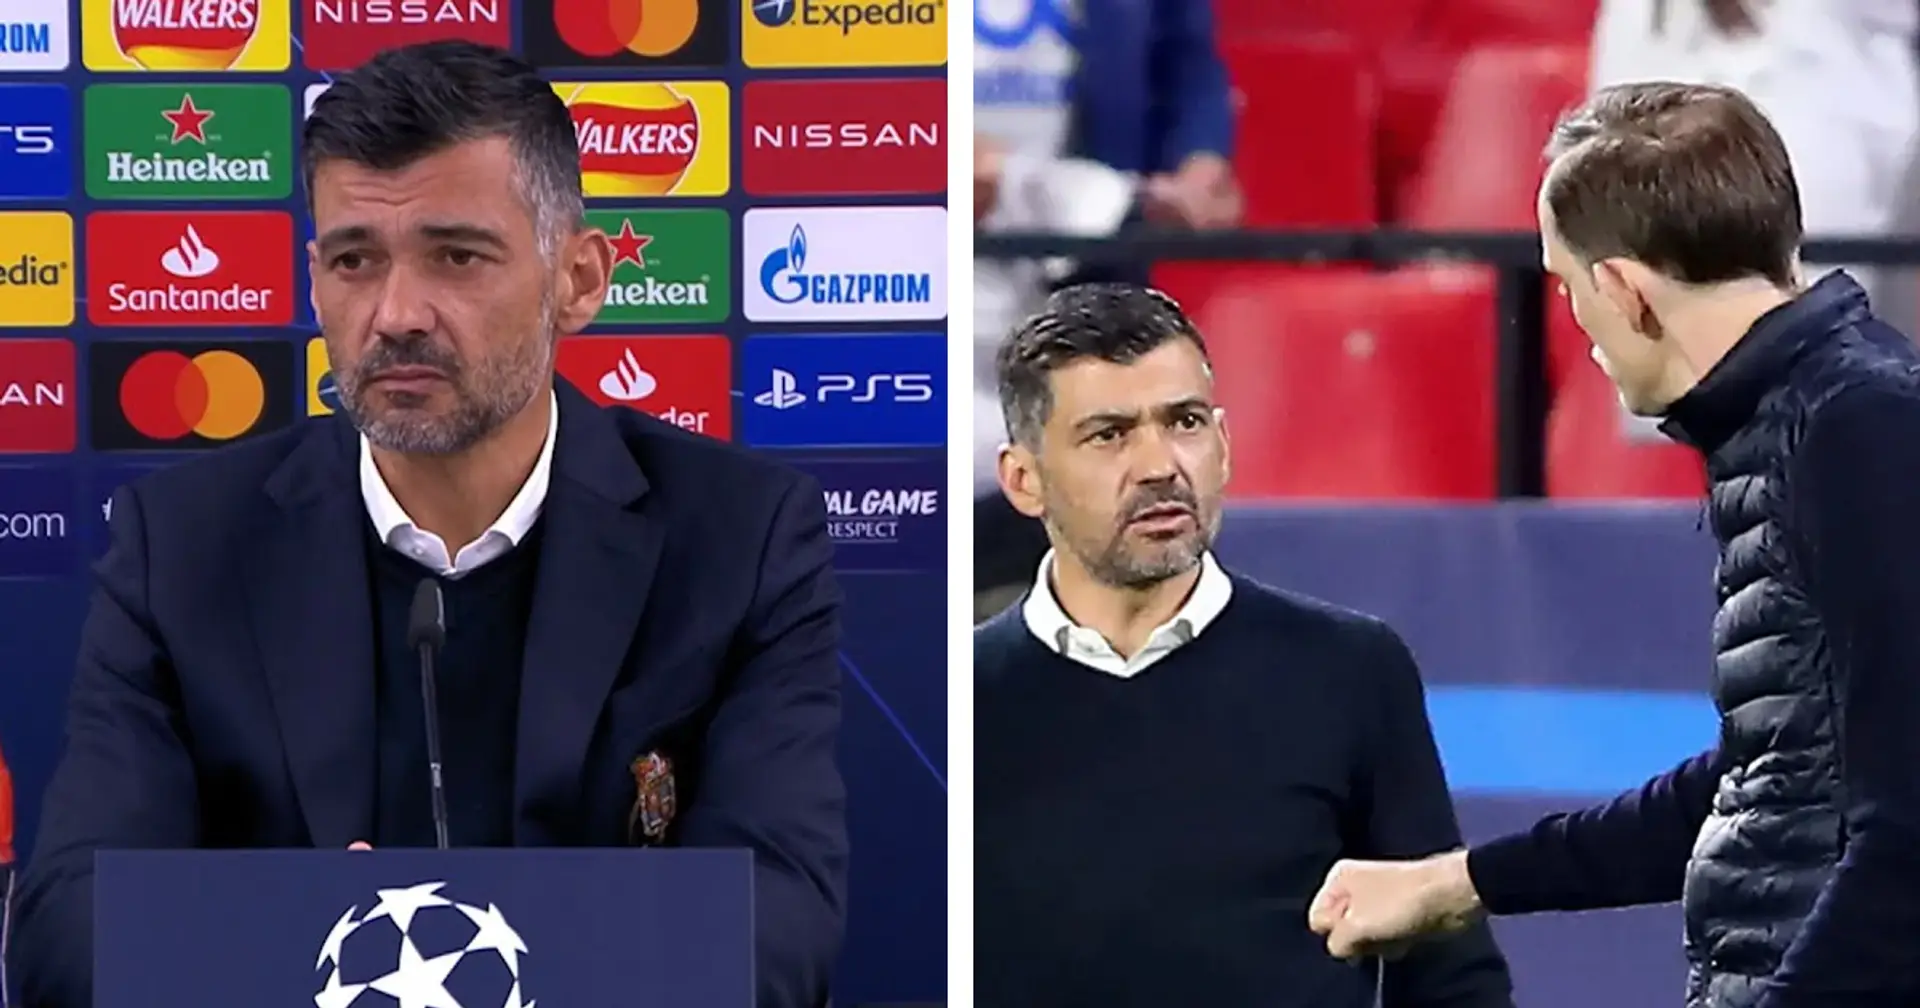 Porto boss Conceicao claims he 'was insulted' by Tuchel after final whistle